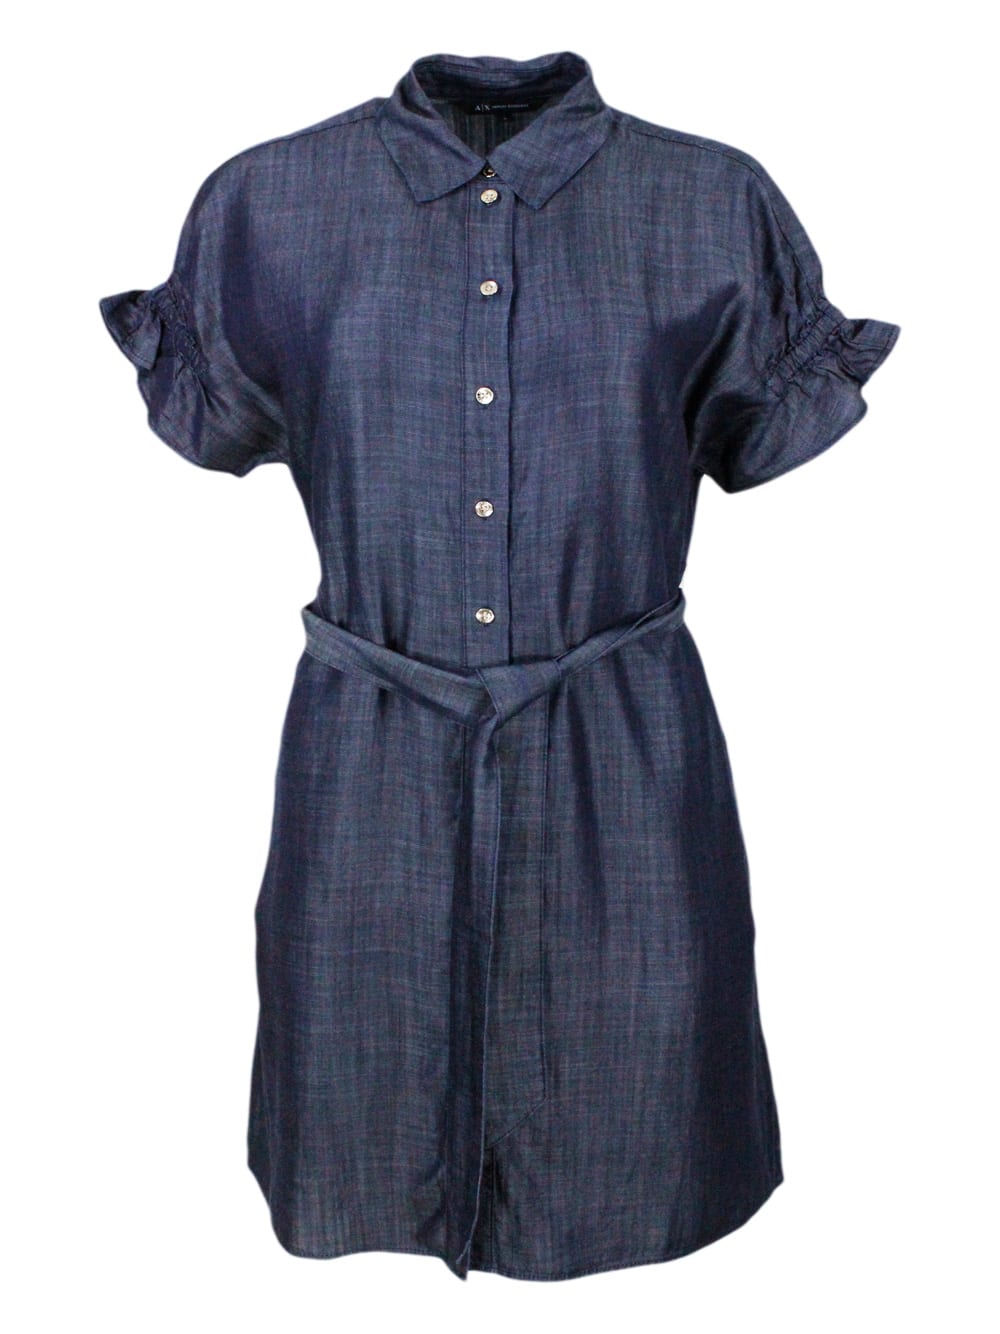 Lightweight Denim Dress With Gathered Sleeves With Button Closure And Belt Supplied